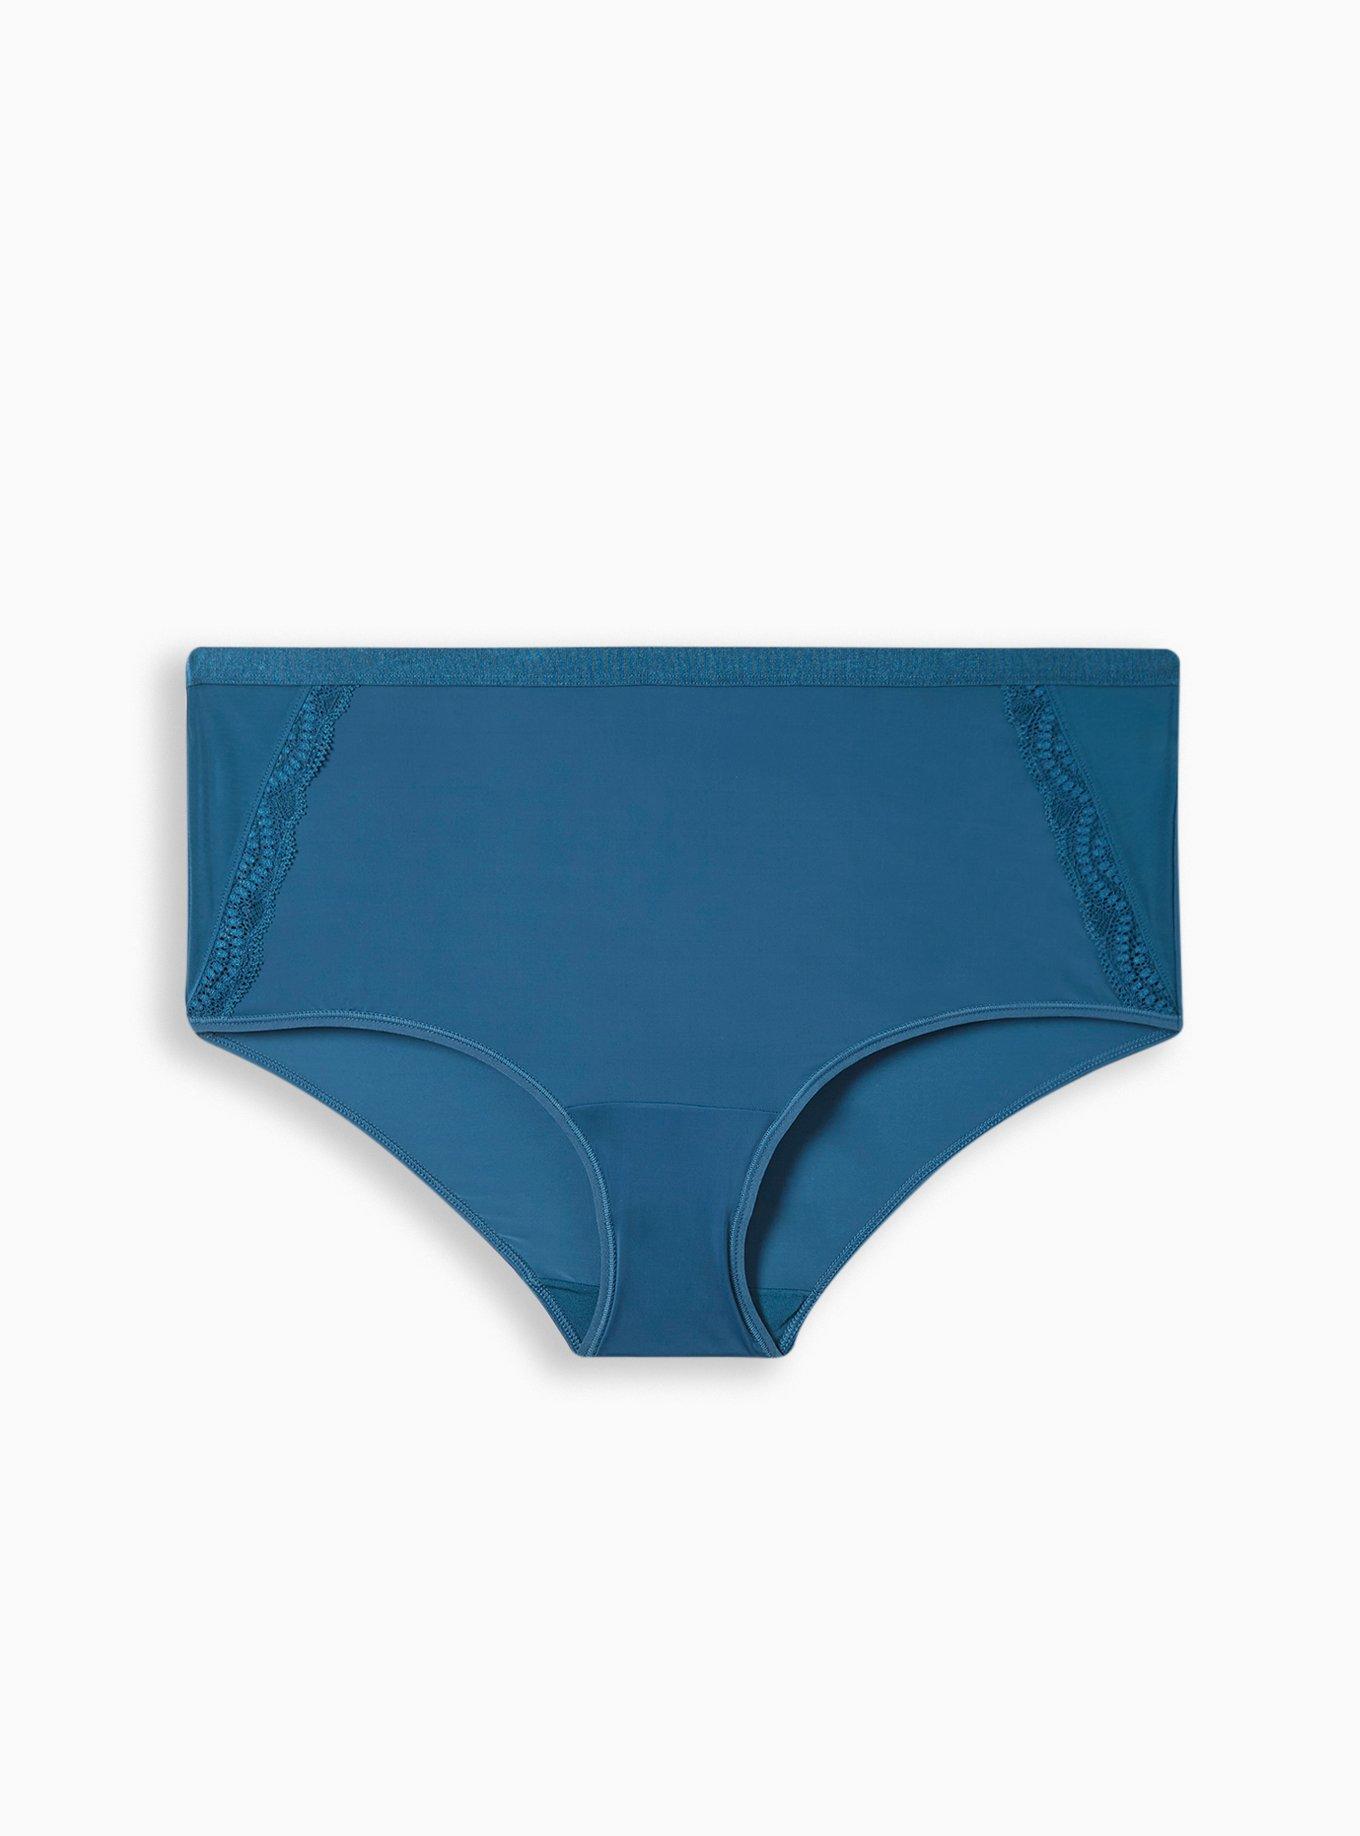 Amore Panty in Teal, Sexy Teal Hipster, Hipster Panties, Gift for Her, Comfy  Sexy Panties -  Israel